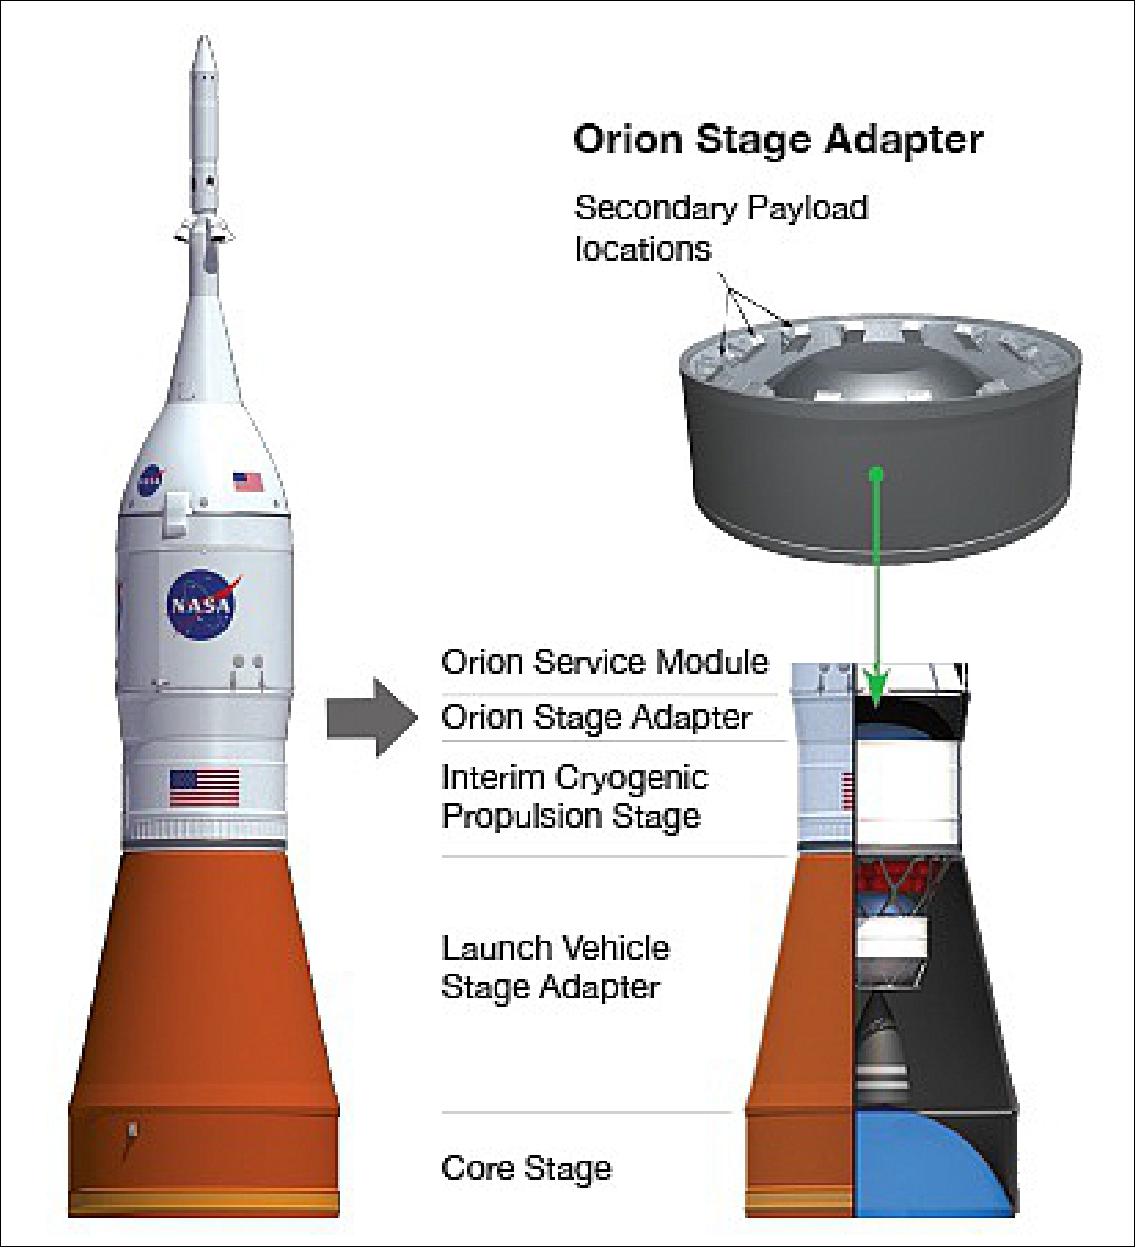 Figure 19: The CubeSats will be deployed from the Orion Stage Adapter (image credit: NASA, Ref. 18)